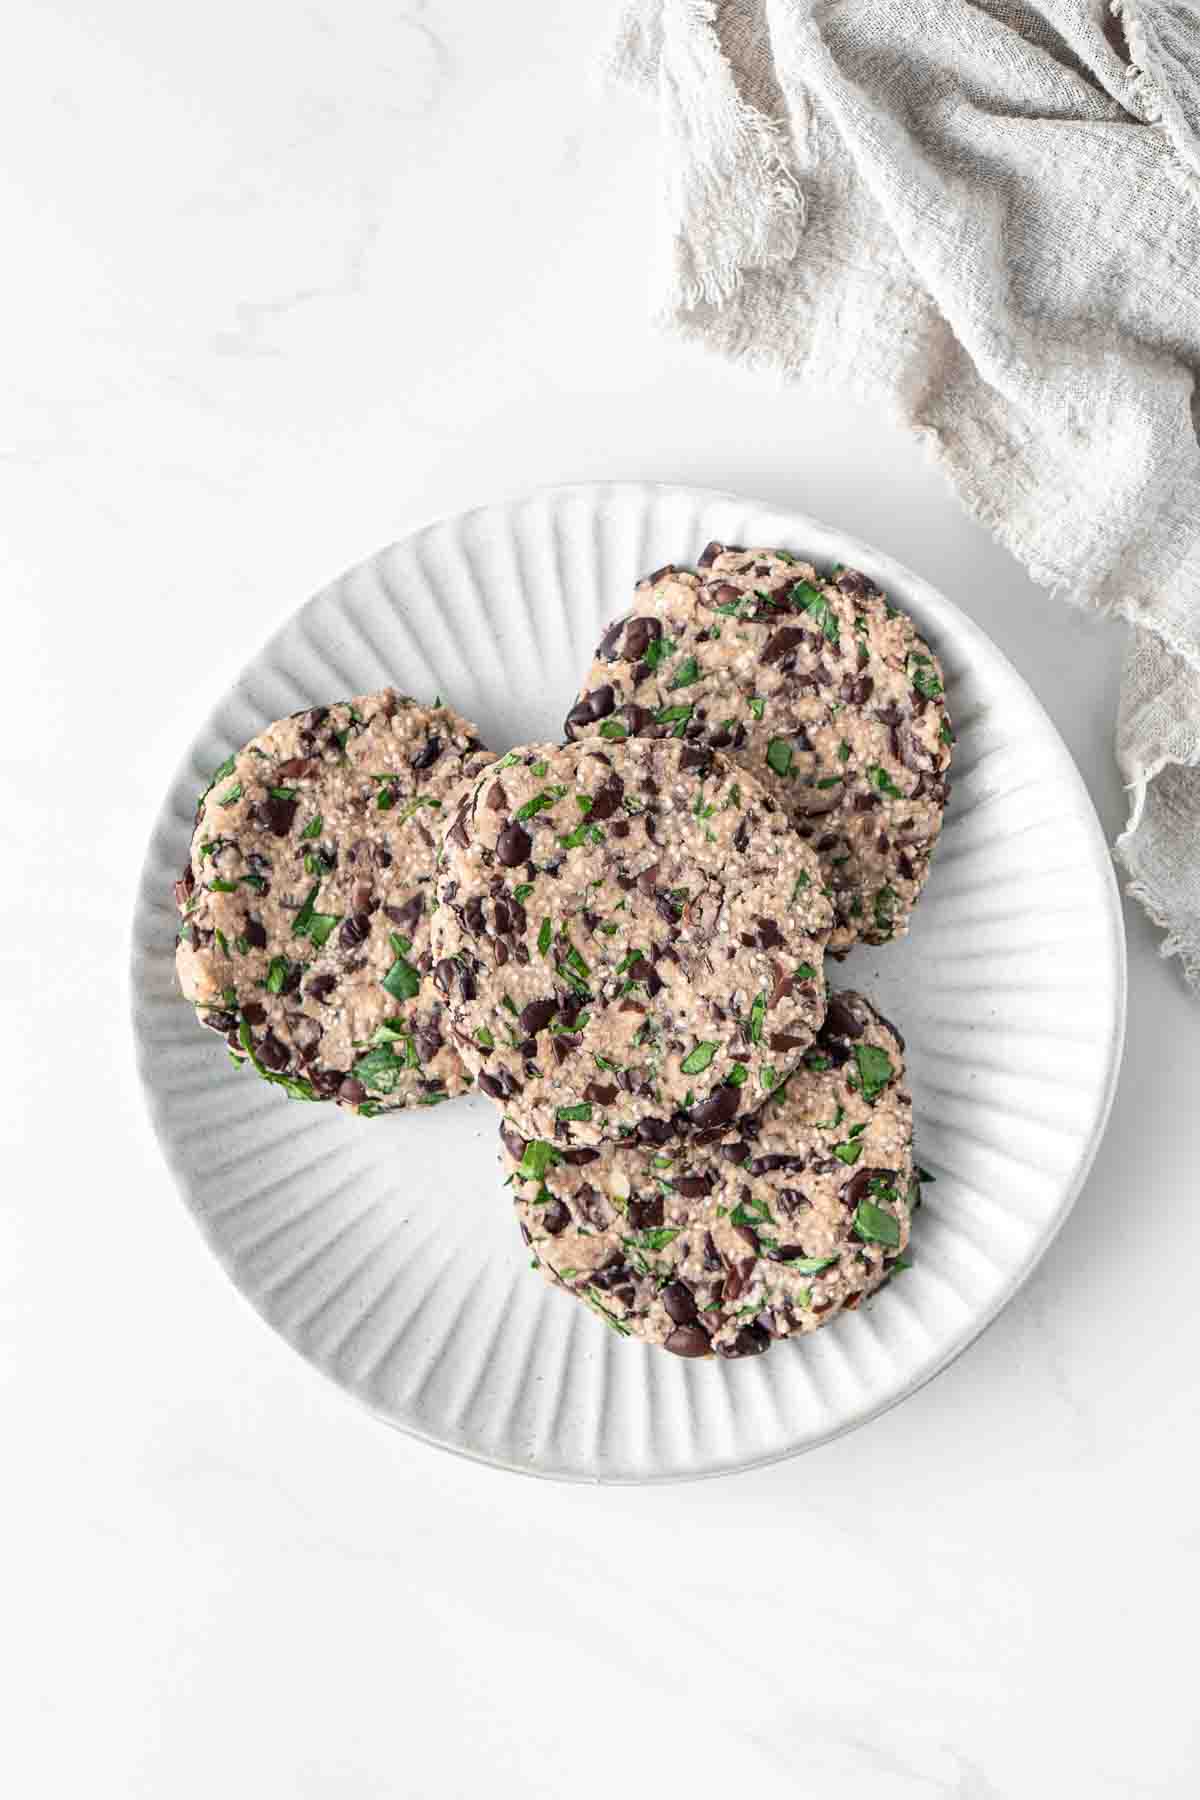 Uncooked black bean burger patties shaped into disks on a plate.